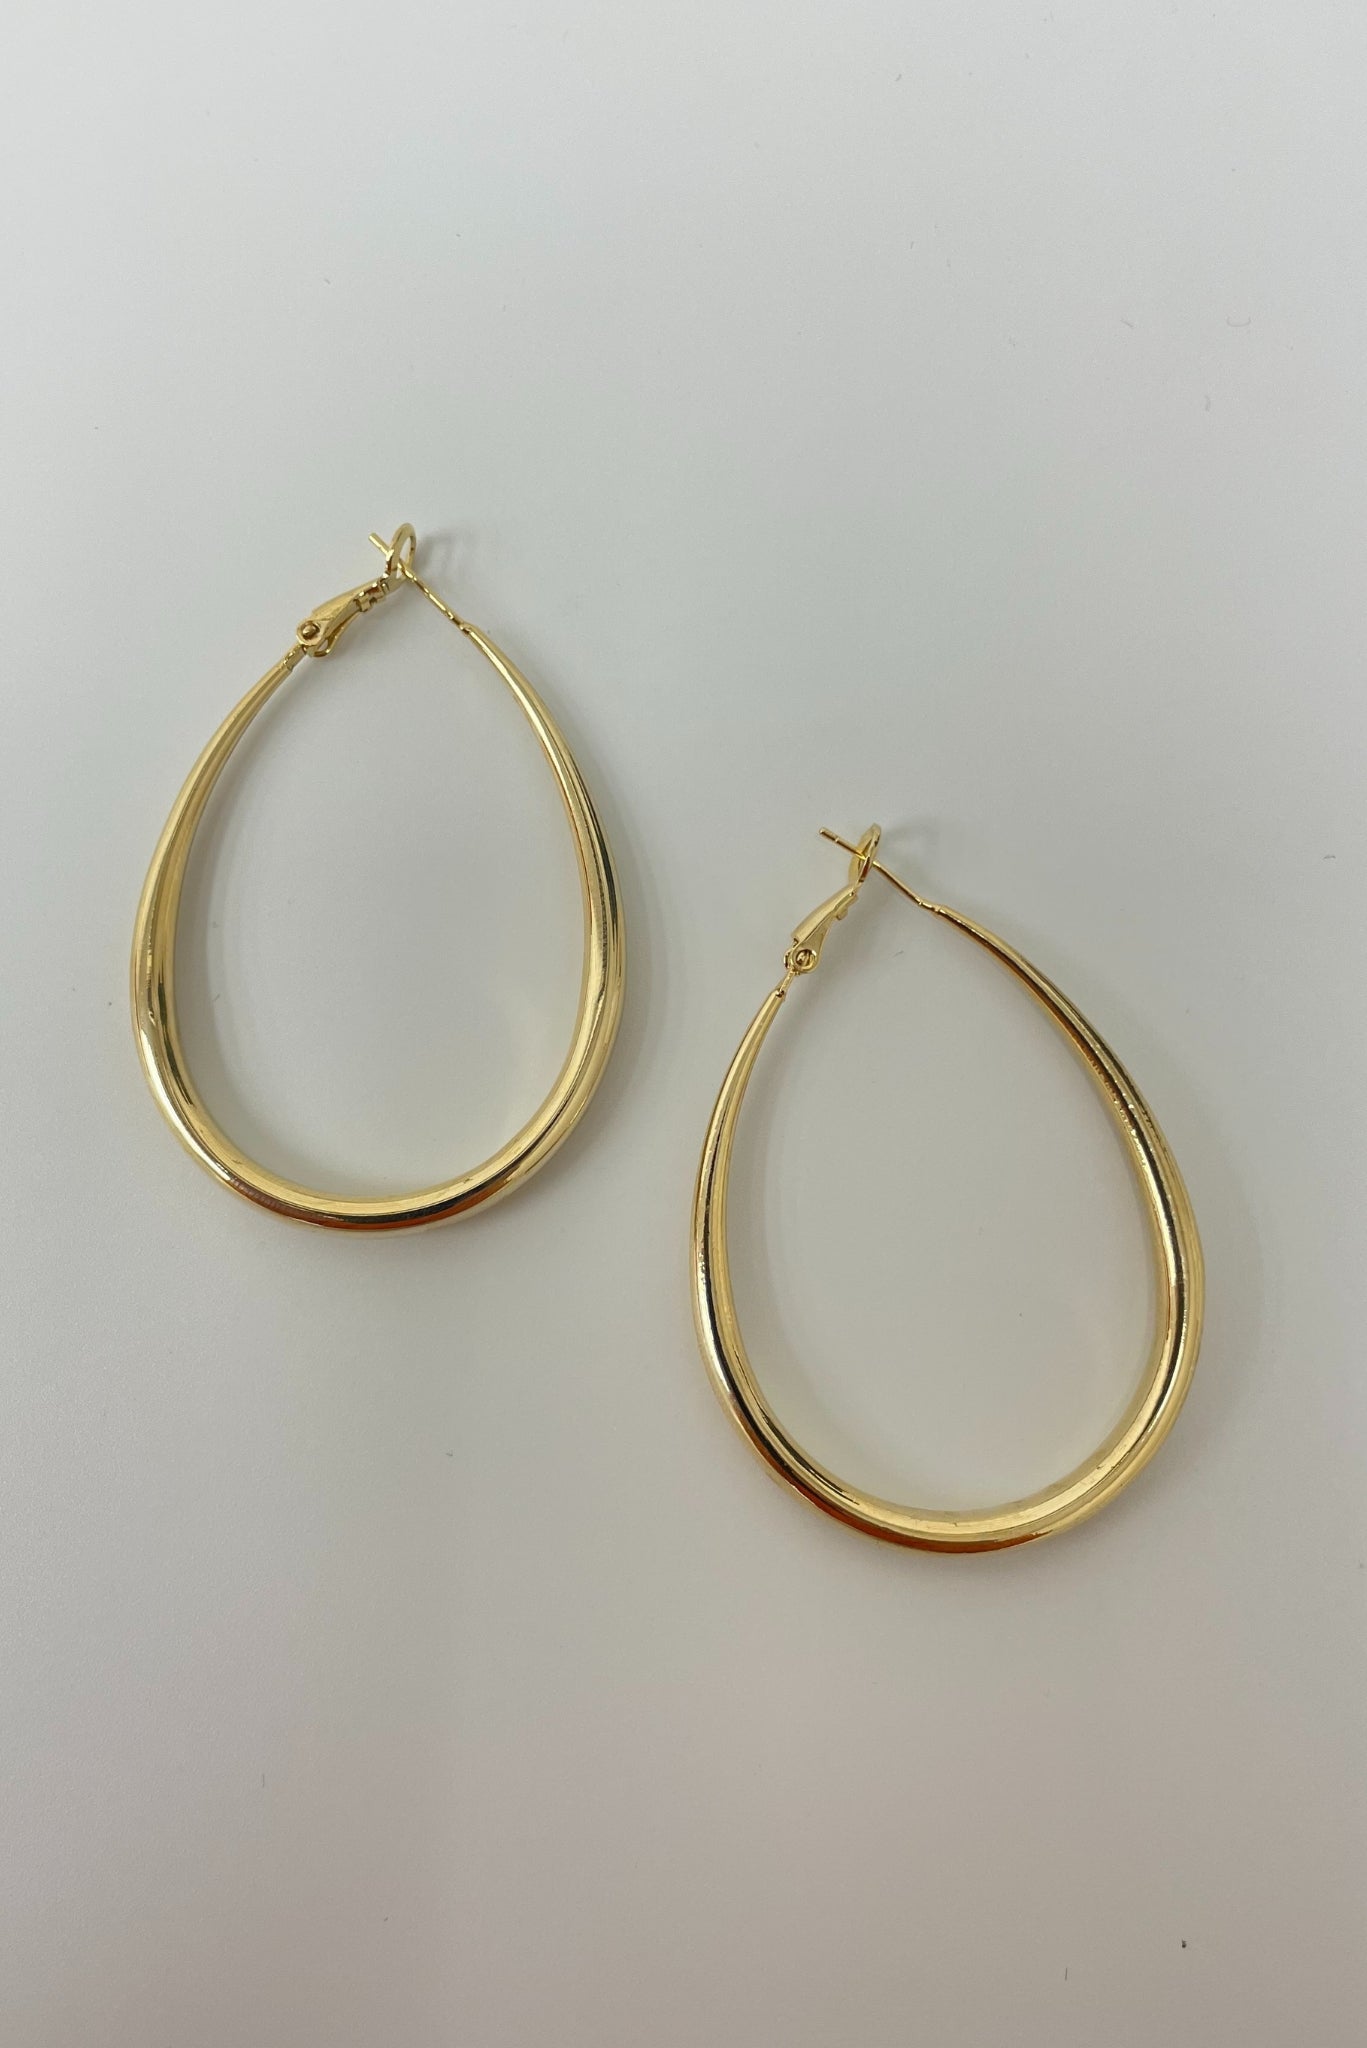 Buy Silver Thin Crystal Hoop Earring Online - Accessorize India